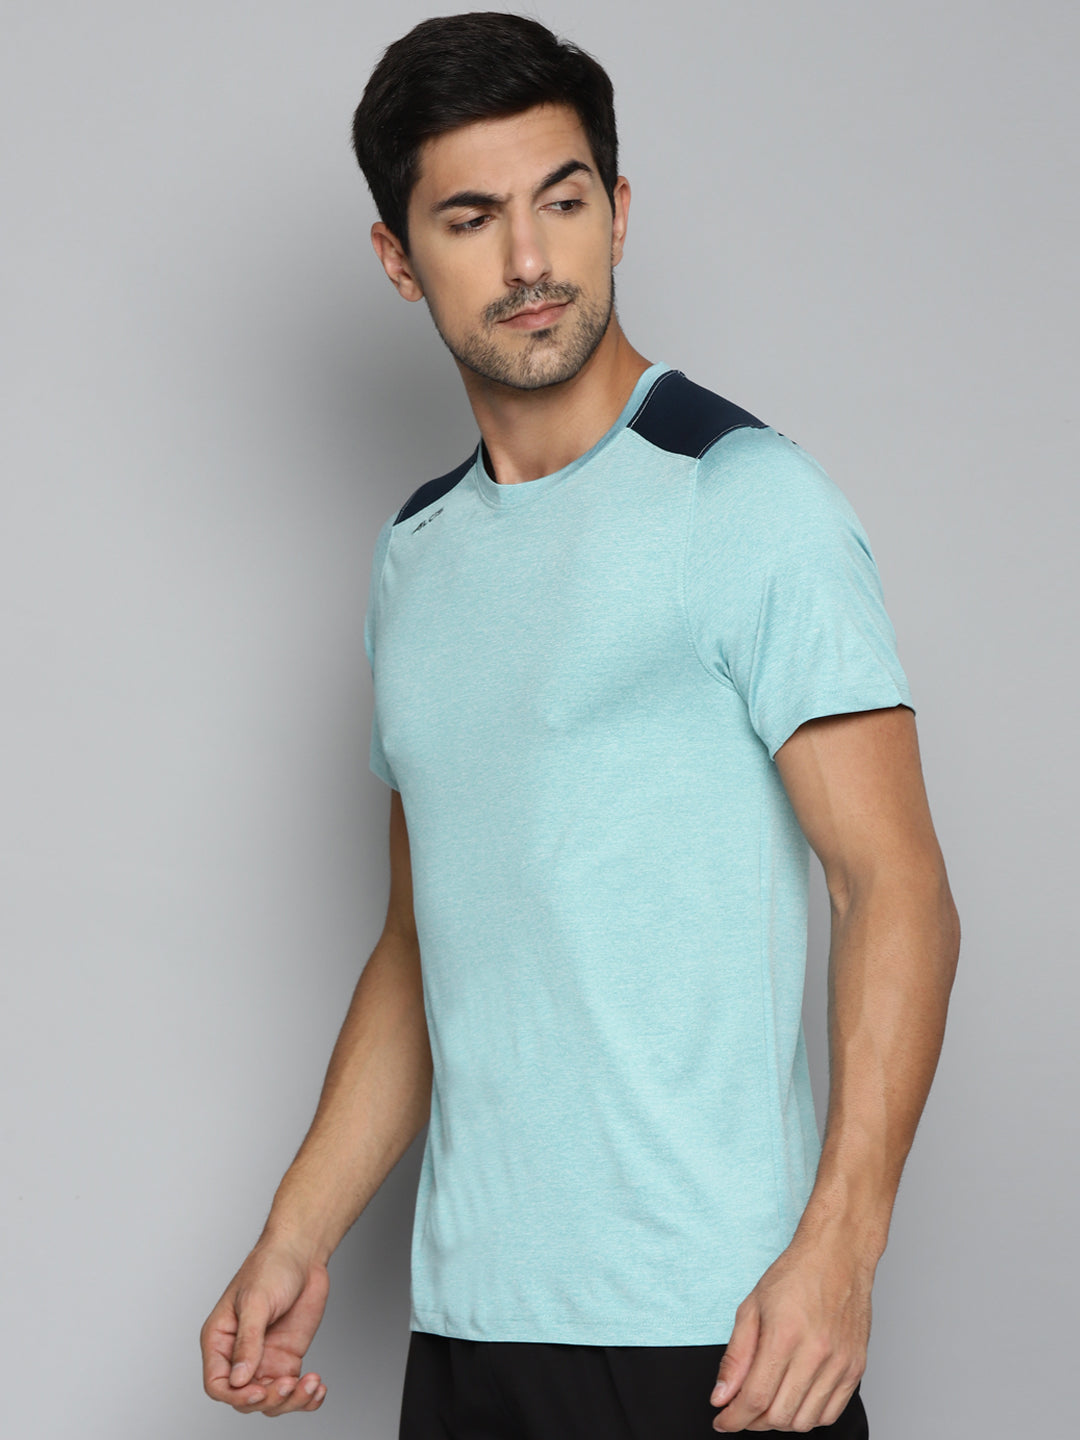 ALCIS Men Turquoise Blue Typography Printed Slim Fit Running T-shirt